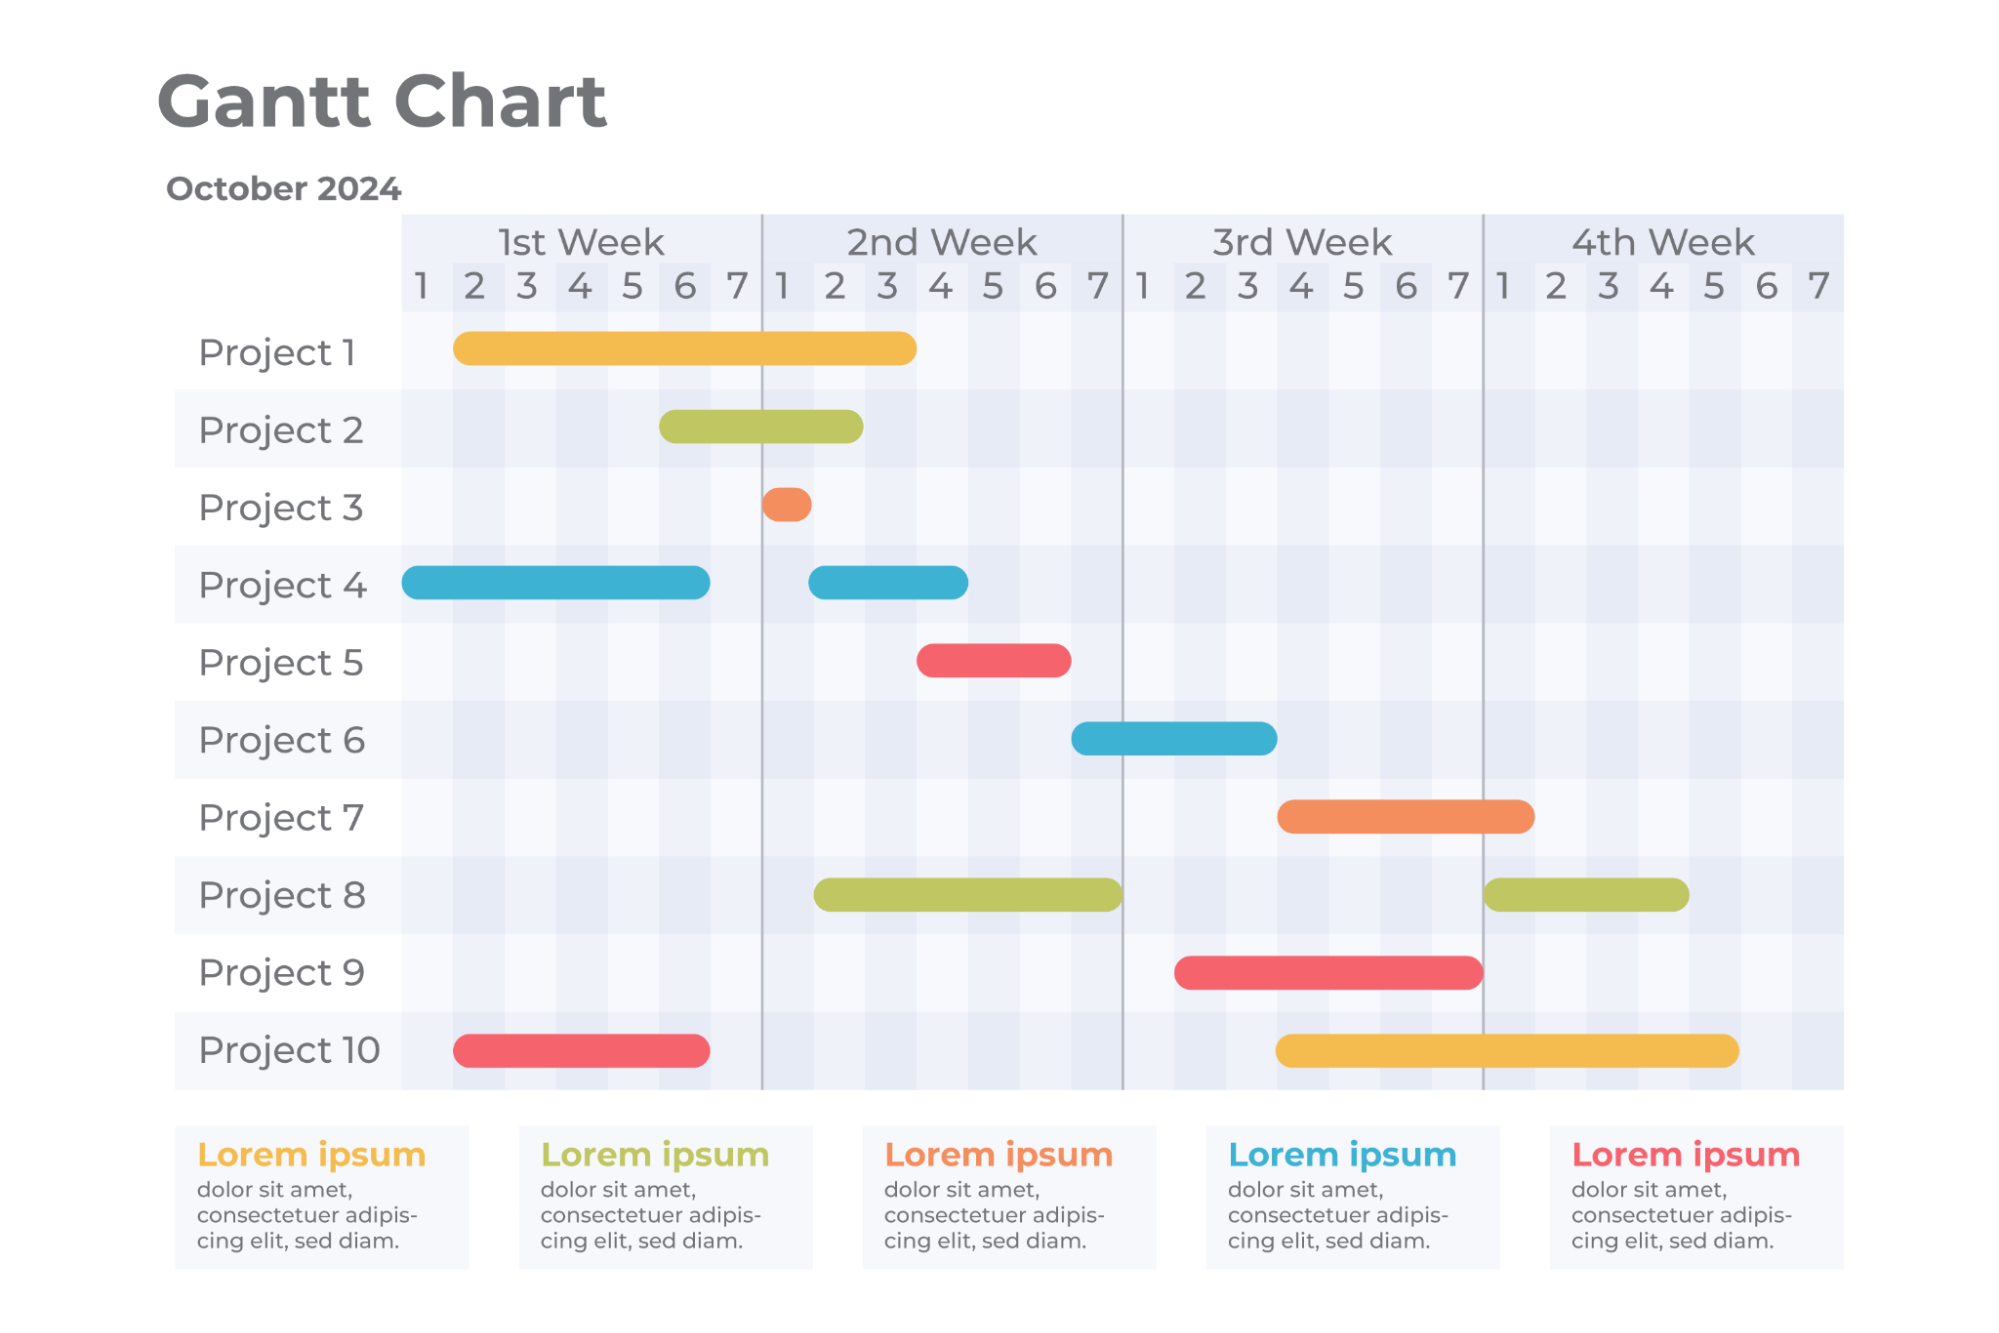 What is meant by a Gantt chart